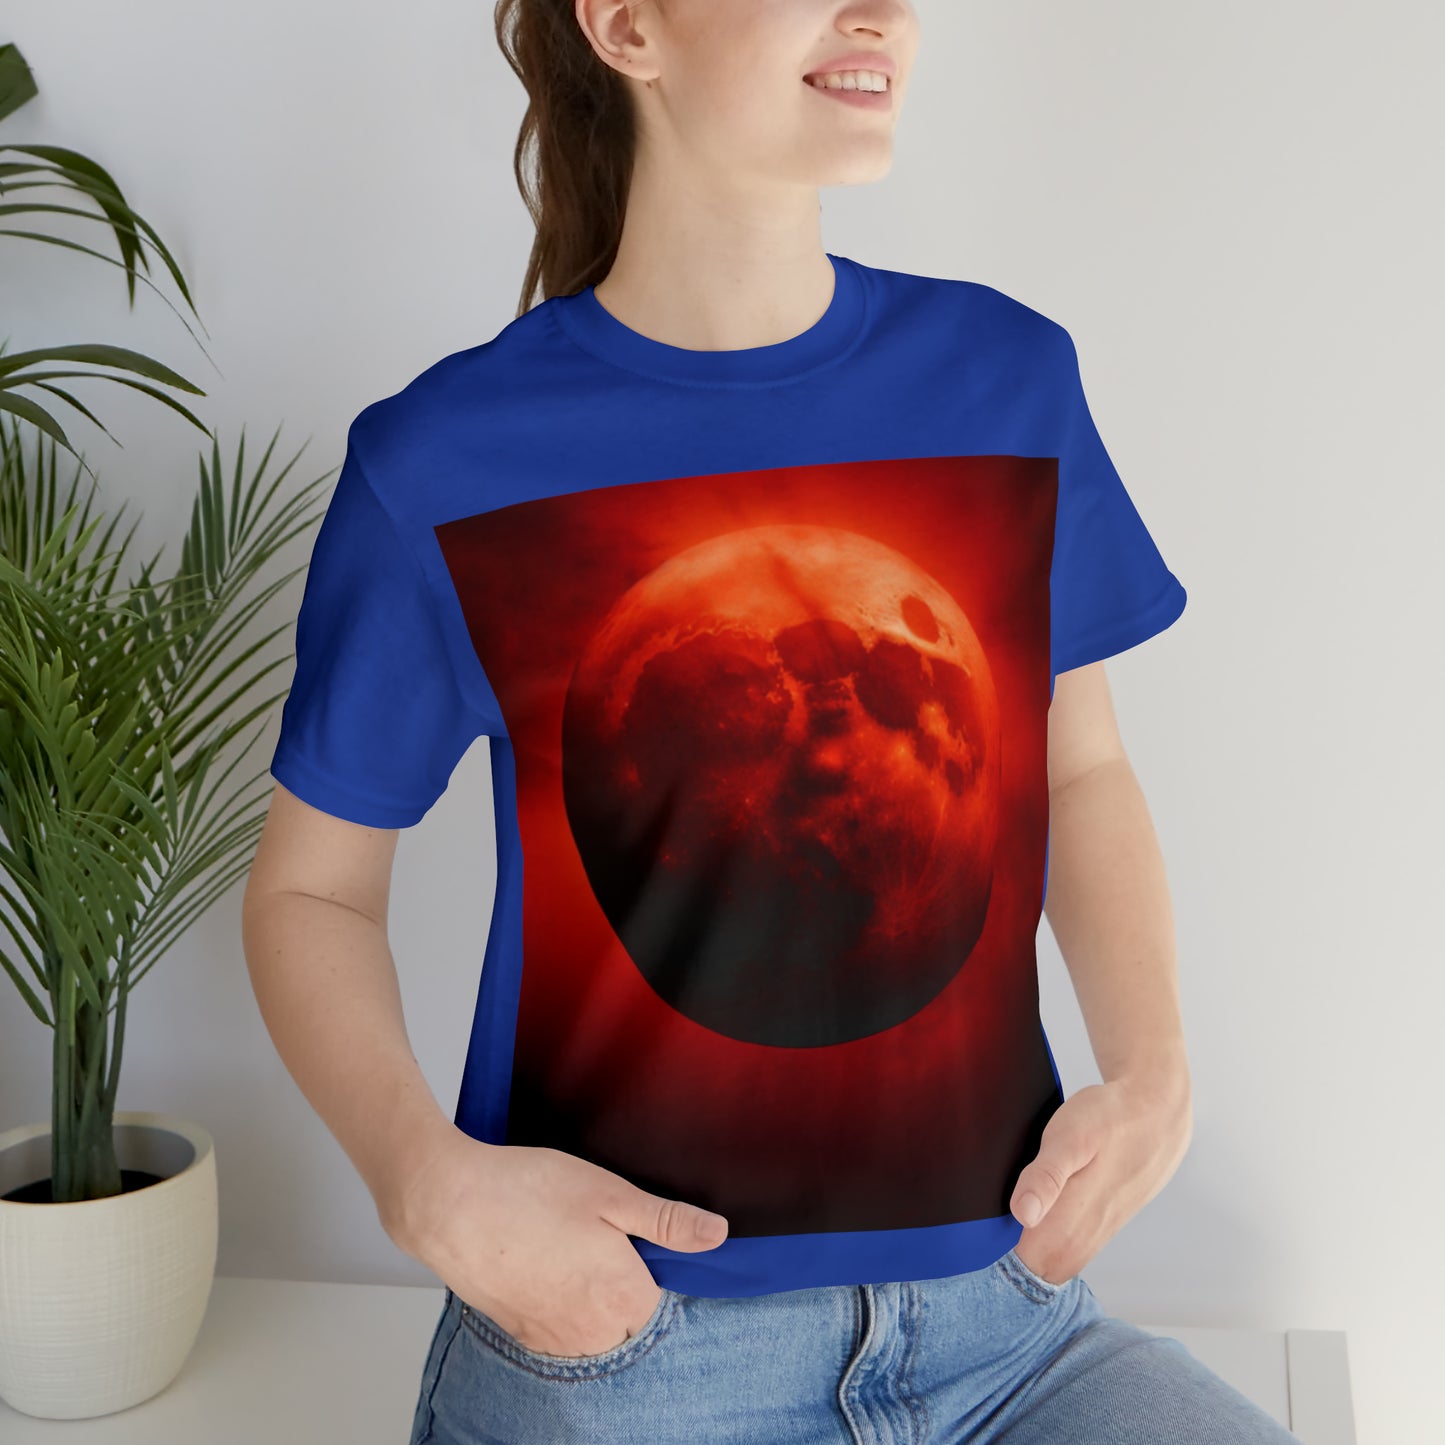 Red Moon T-shirt